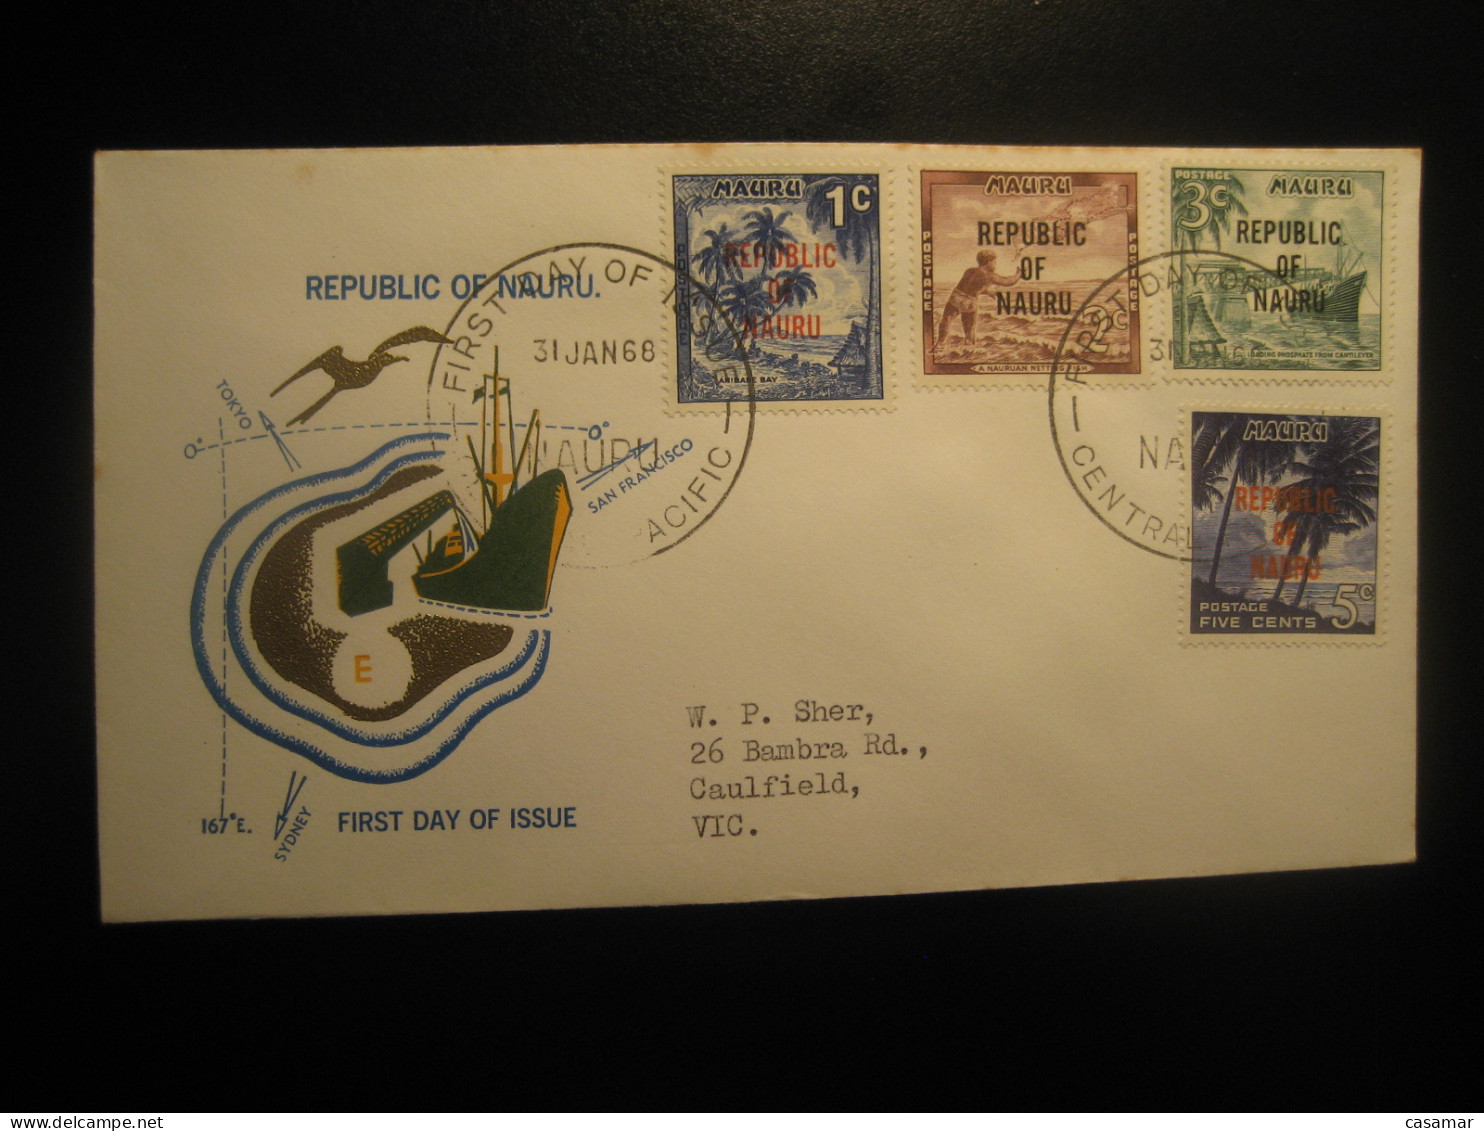 CENTRAL PACIFIC 1968 To Caulfield Australia Phosphate Geology Mineral Minerals FDC Cancel Cover NAURU - Minerales